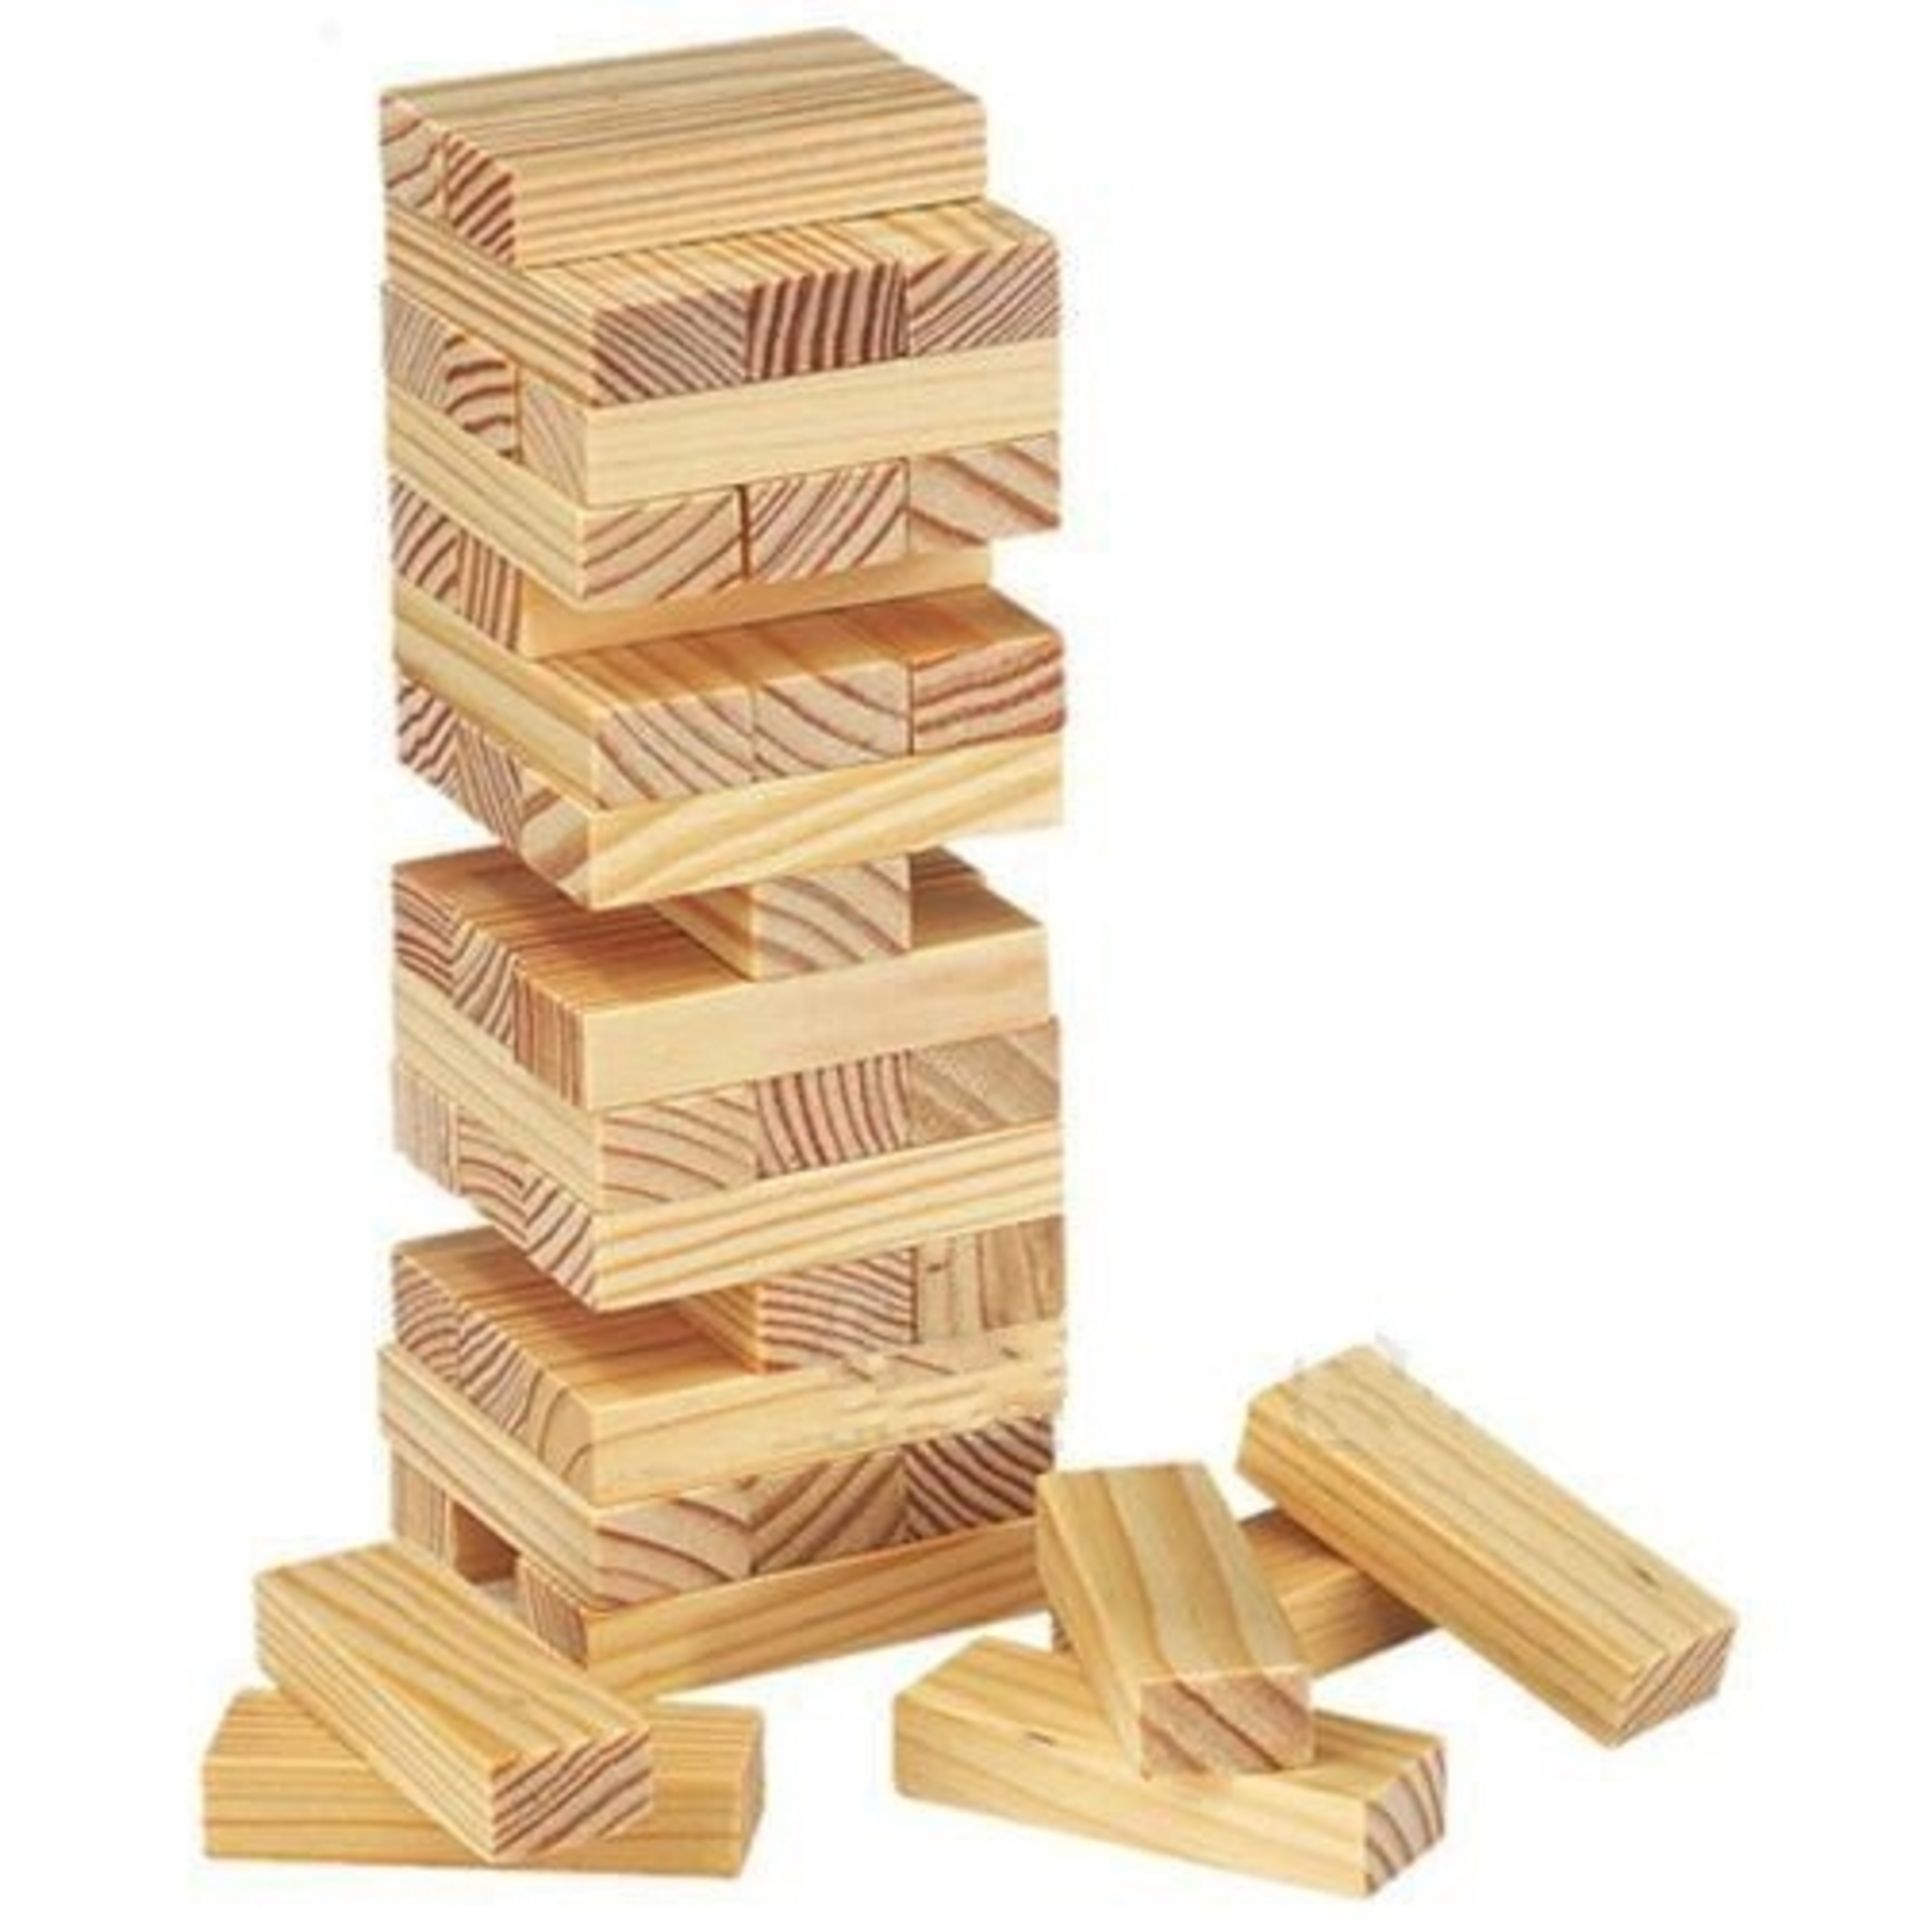 V Brand New Quality Wooden Tower Block Game X 2 YOUR BID PRICE TO BE MULTIPLIED BY TWO